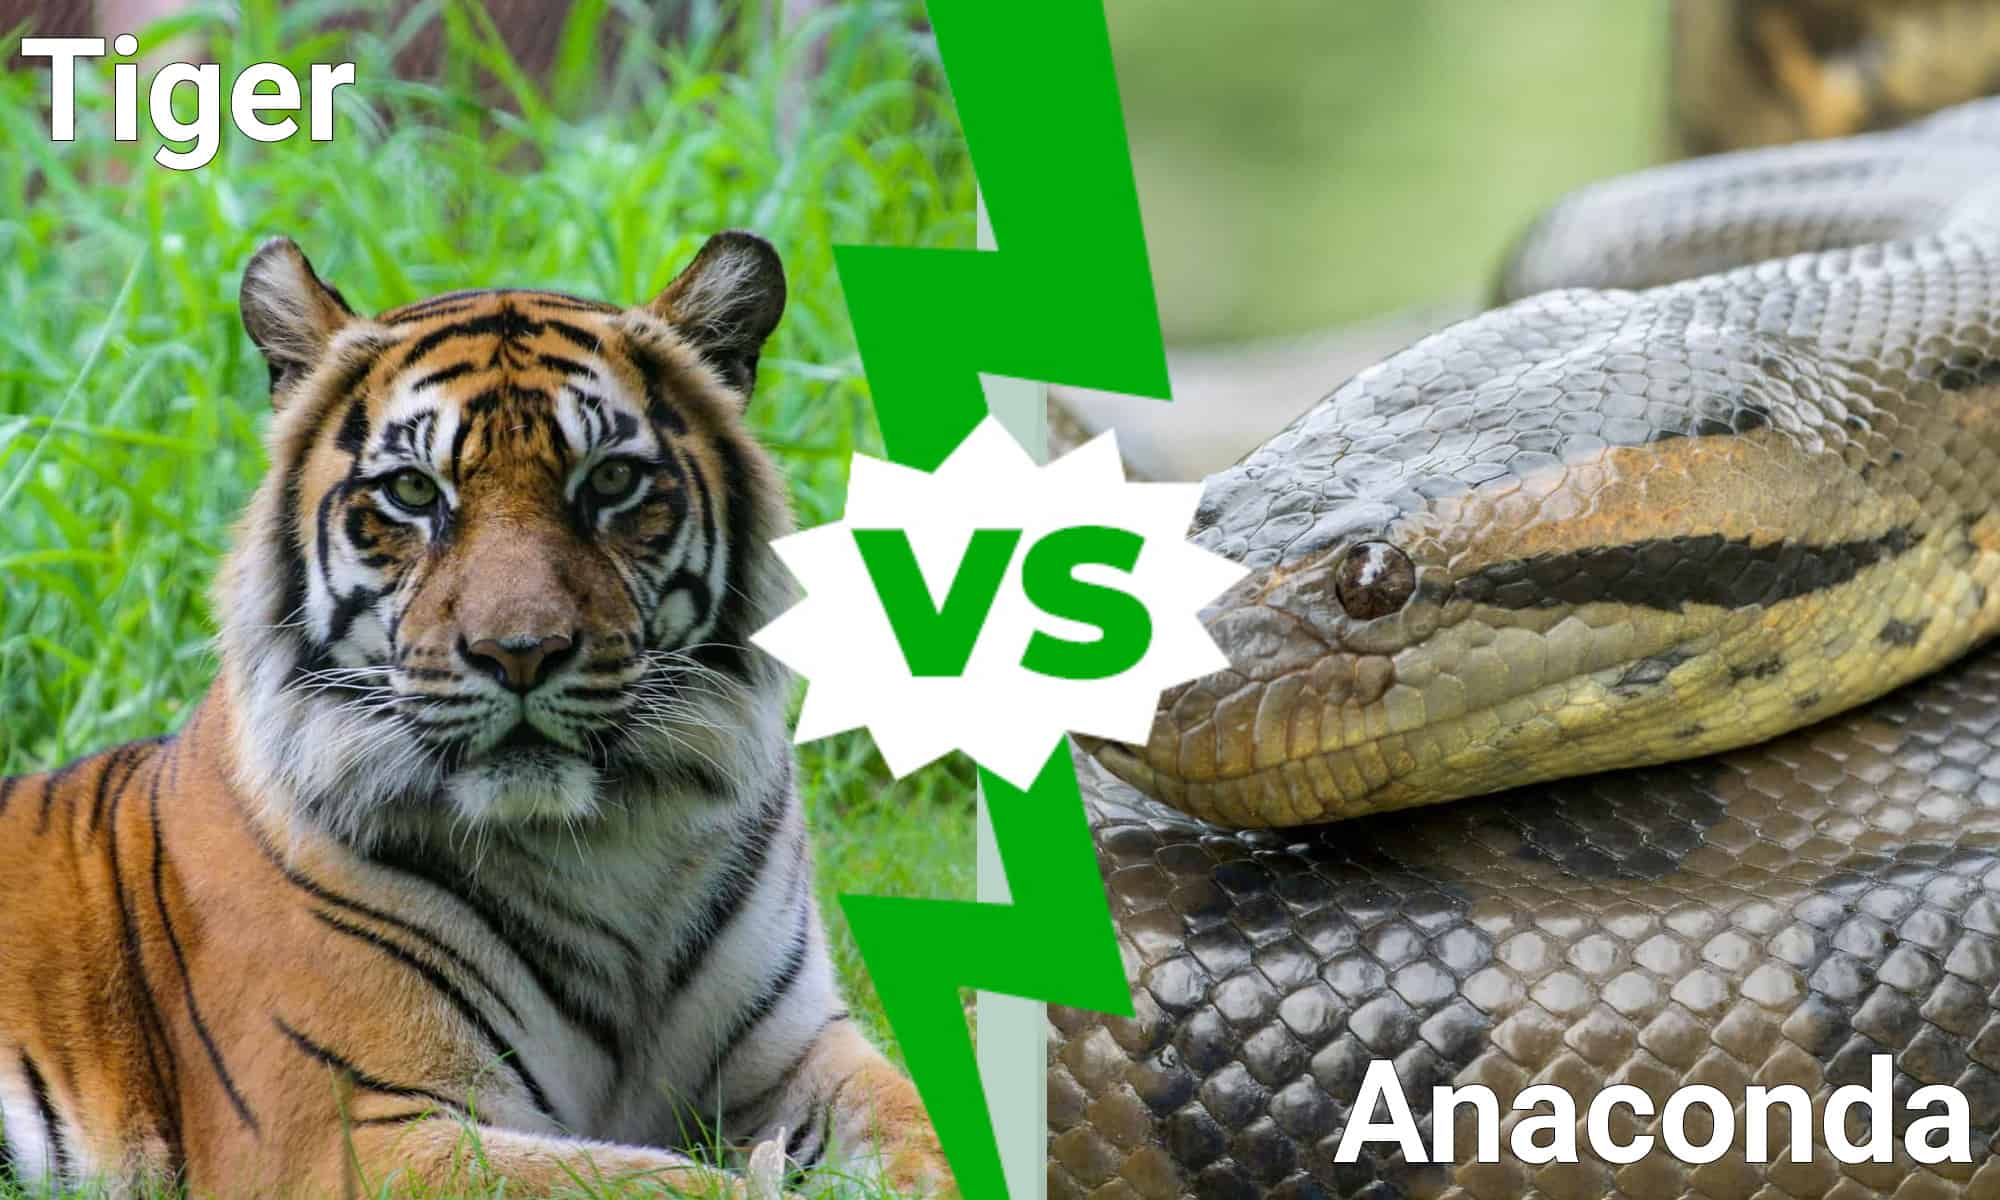 Who is stronger anaconda or tiger?